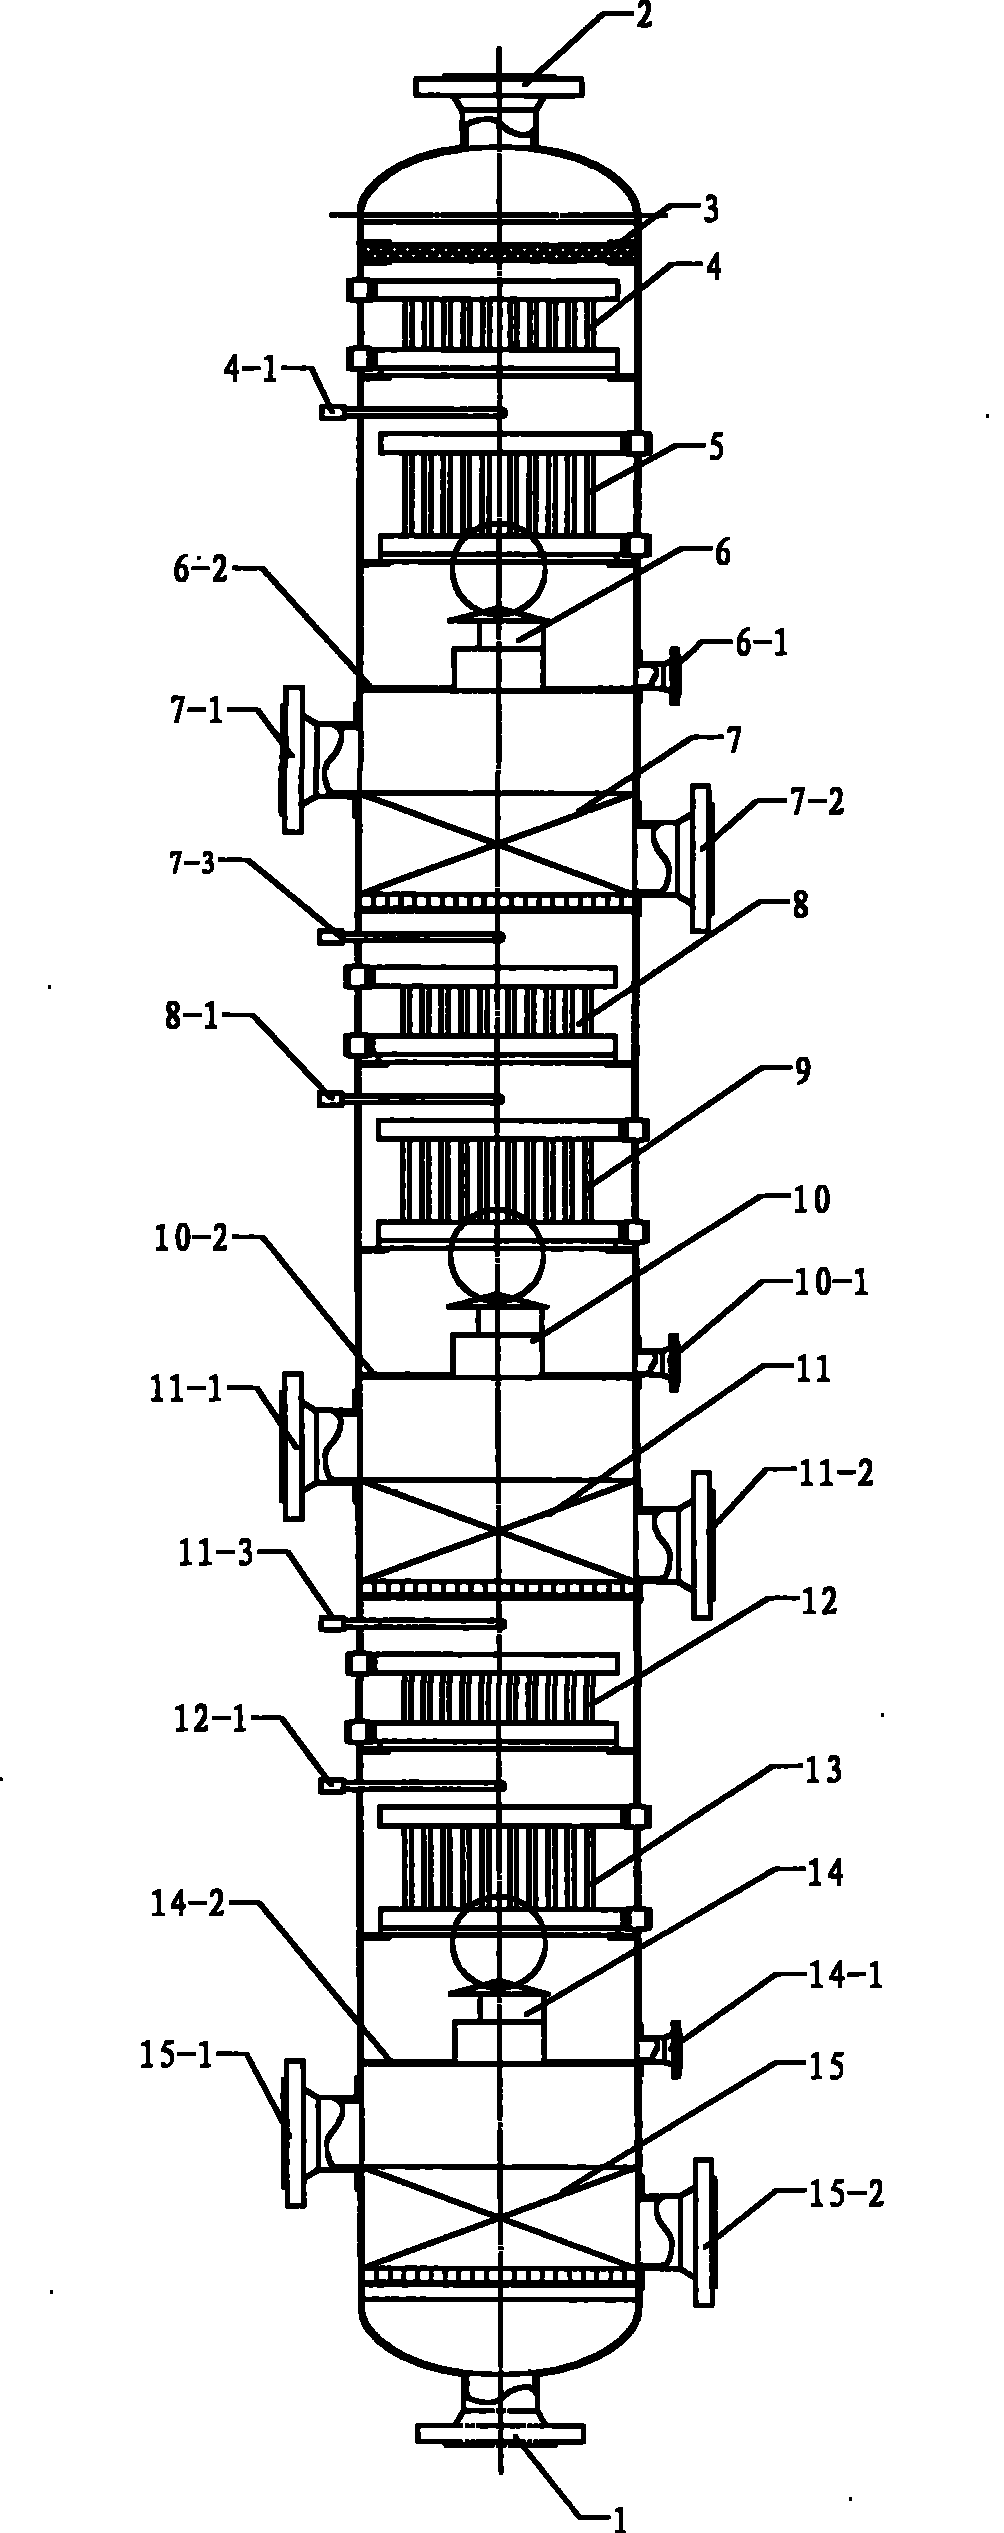 Combined internal thermal cooler sulfur recovery reactor